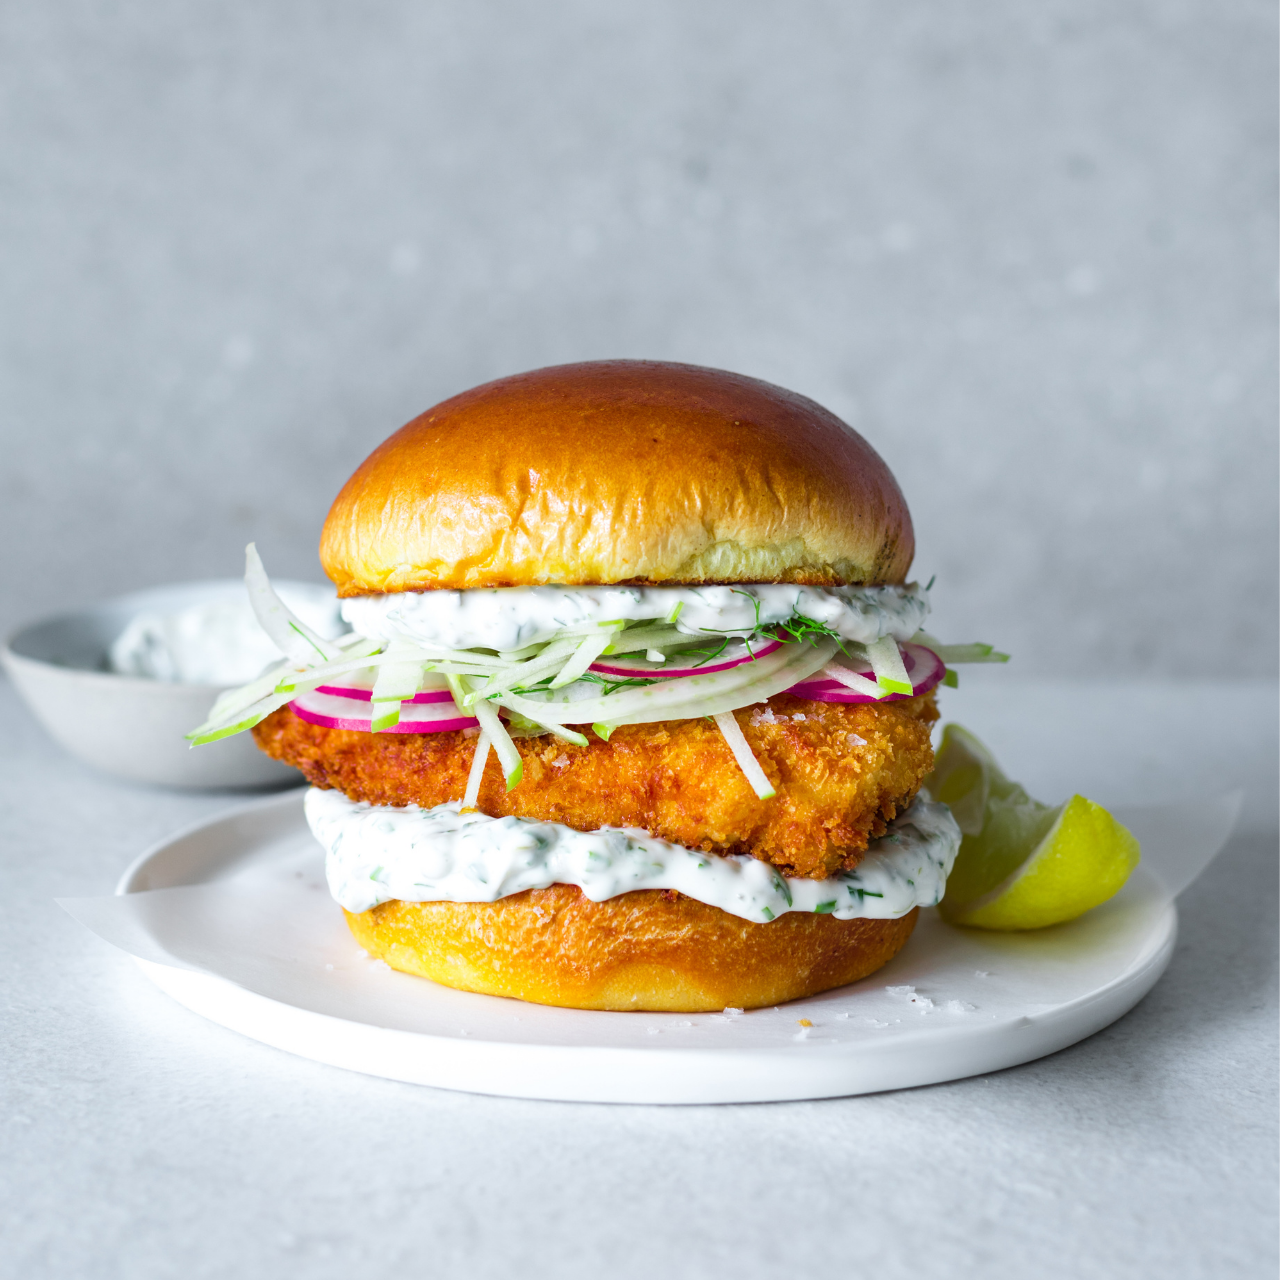 Sanford and Sons | Panko Crumbed Fish Burgers Recipe | Sanford and Sons